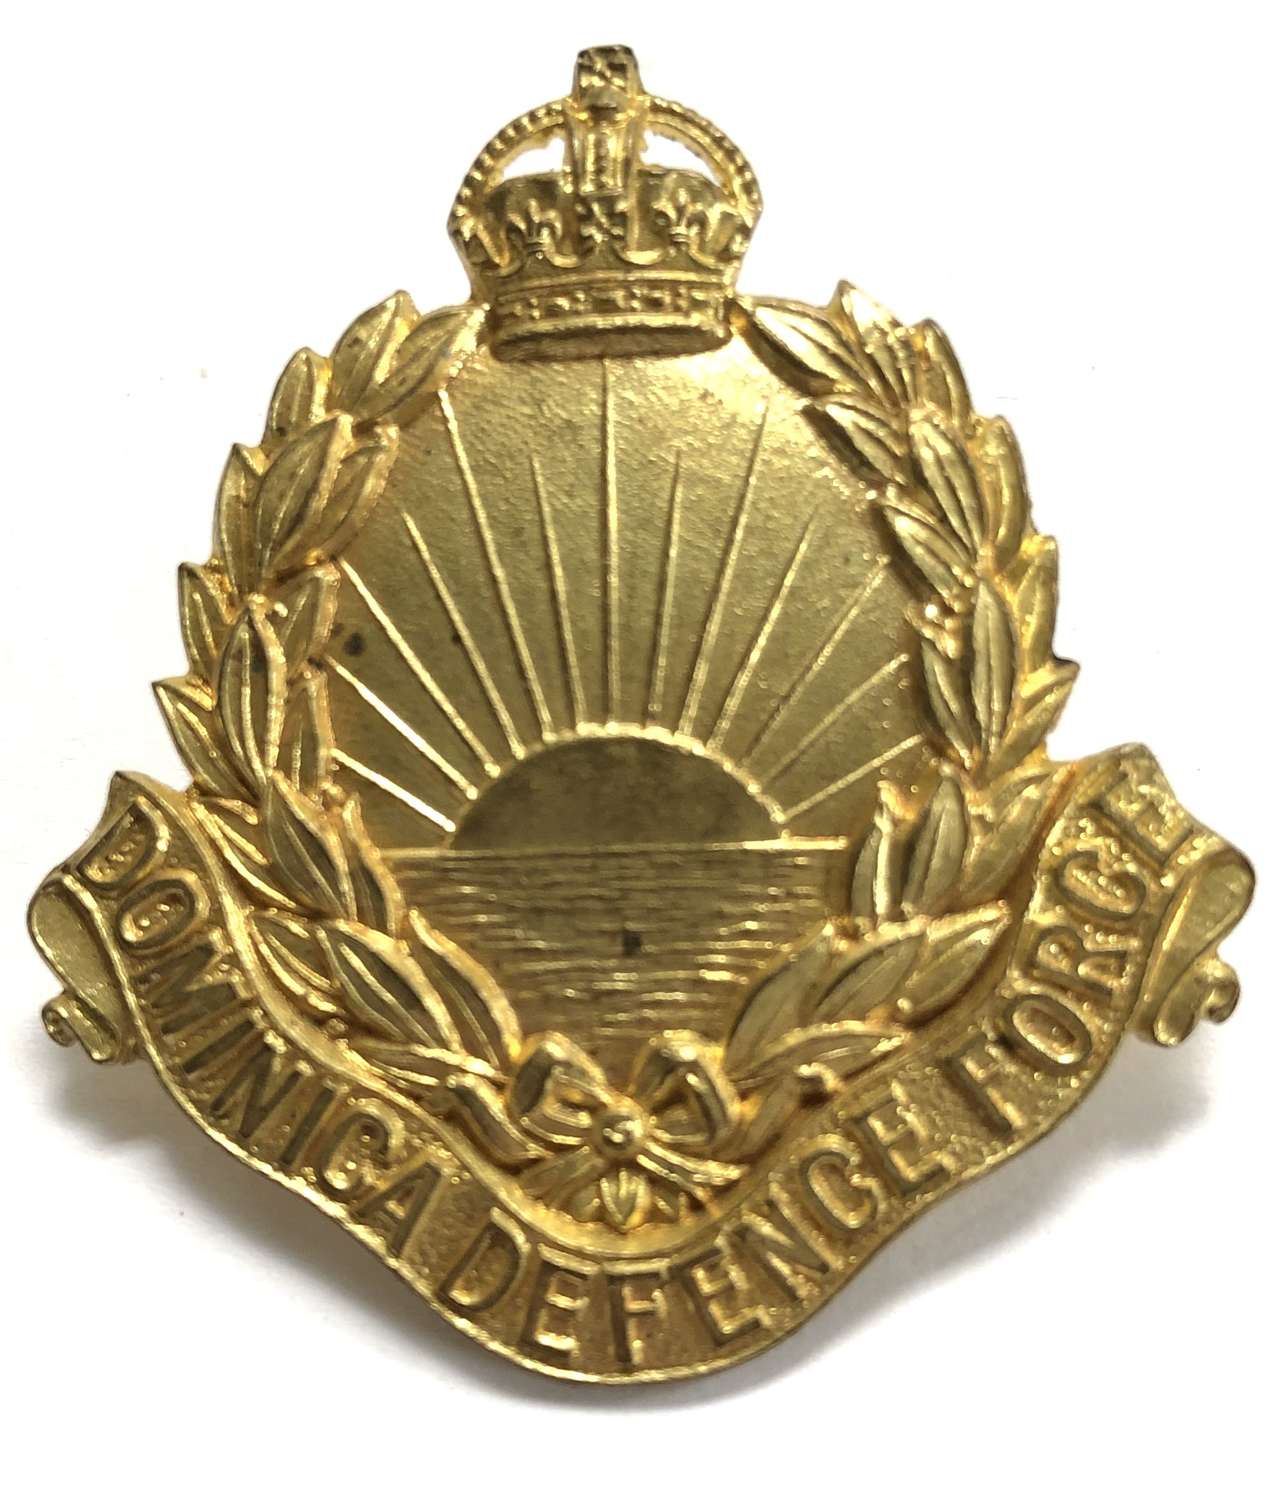 Dominica Defence Force OR’s cap badge